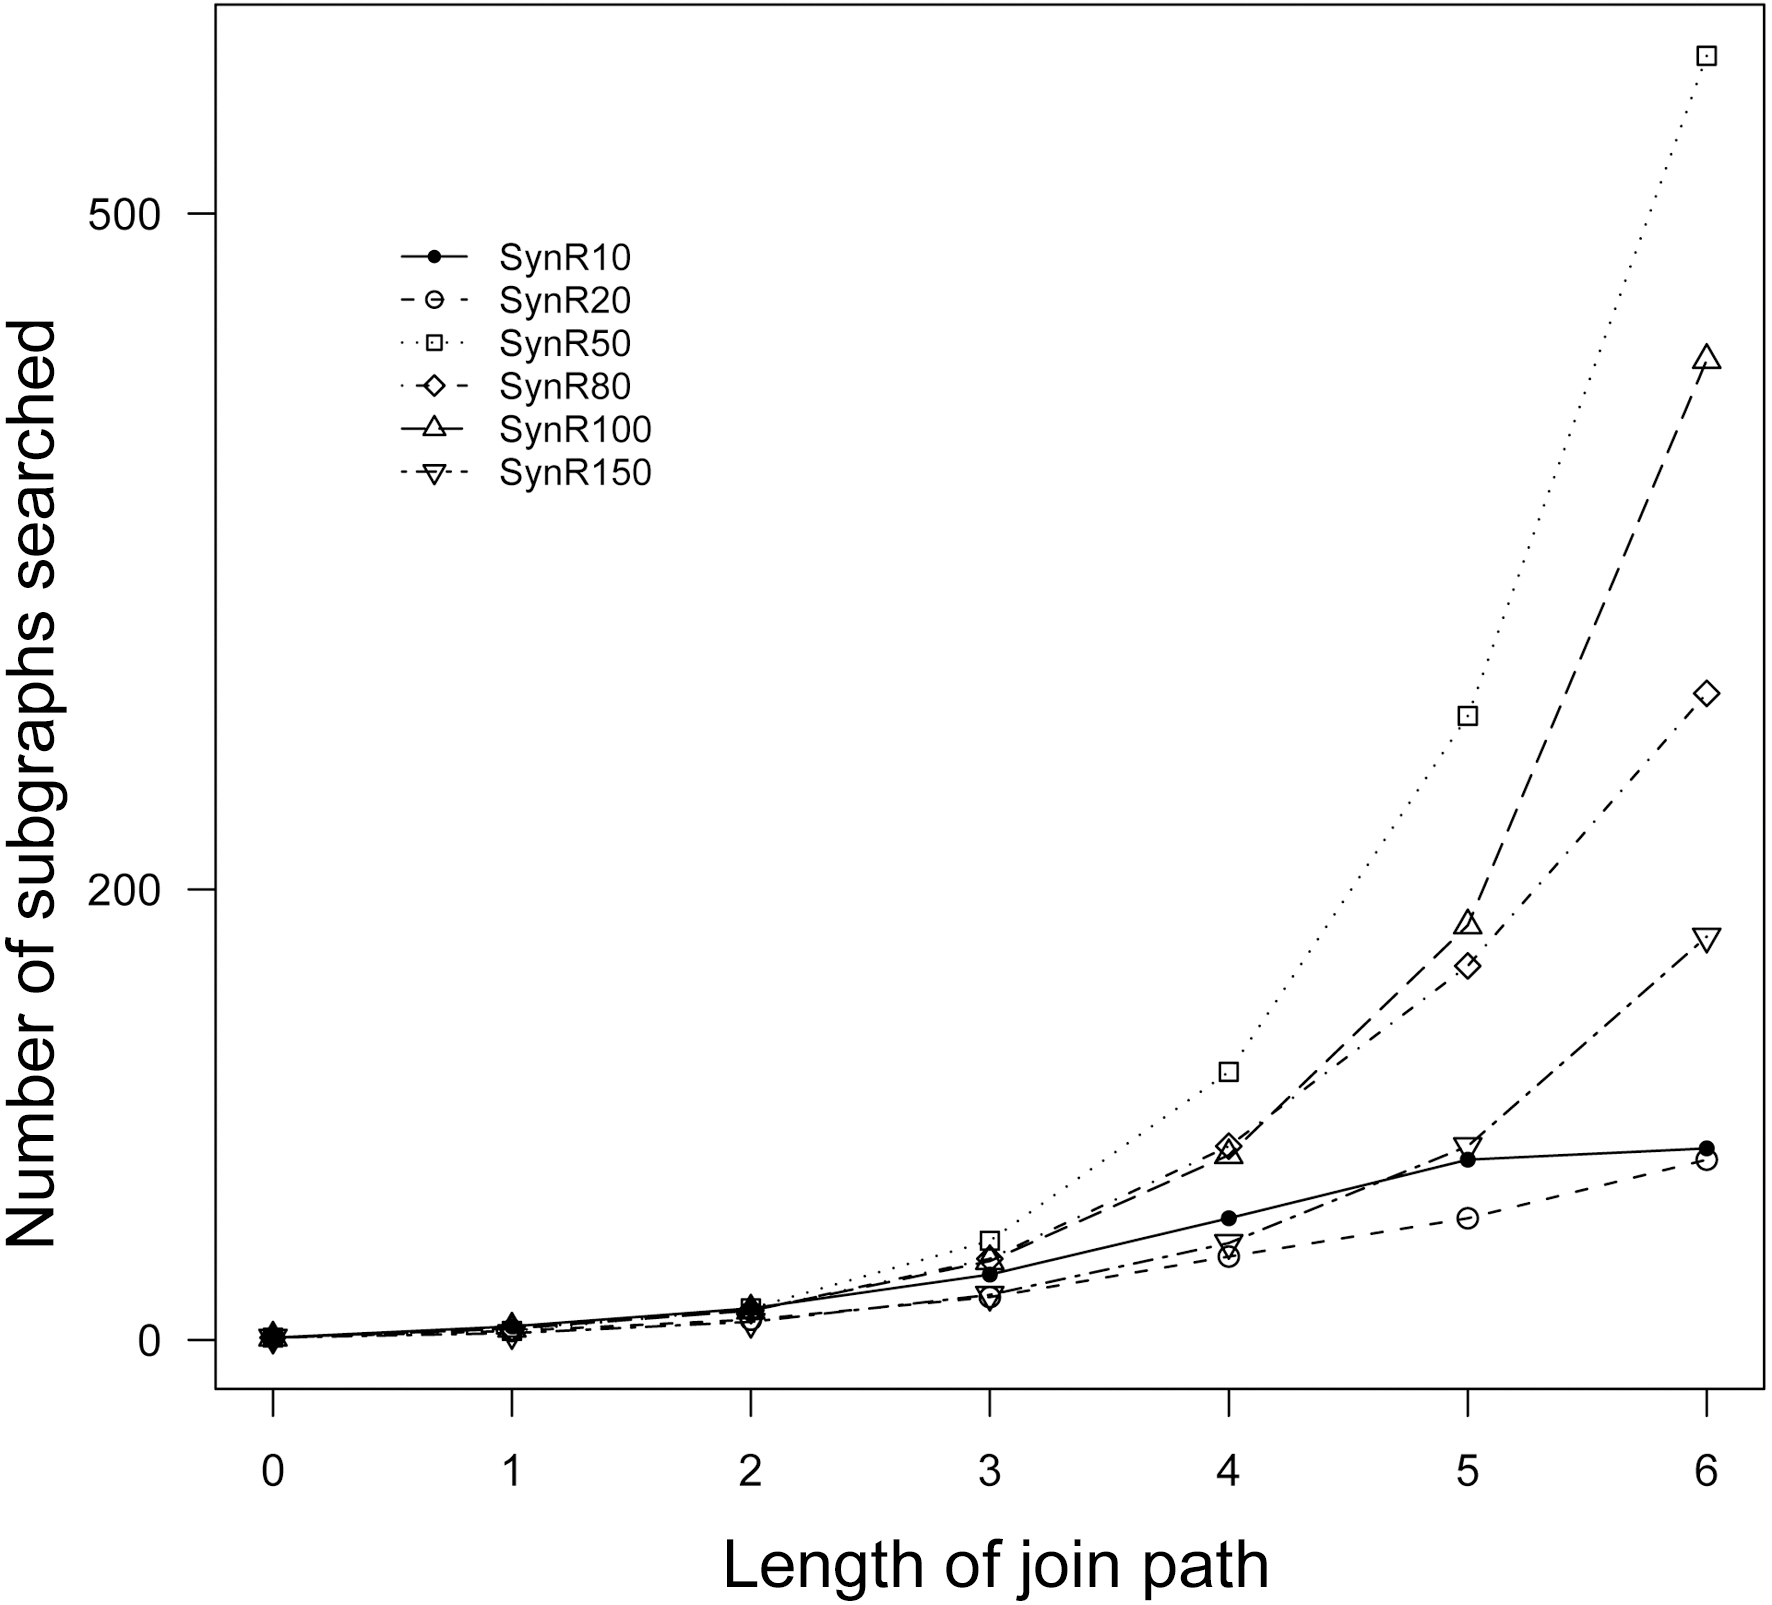 Number of Subgraphs vs. Length of Join Path.